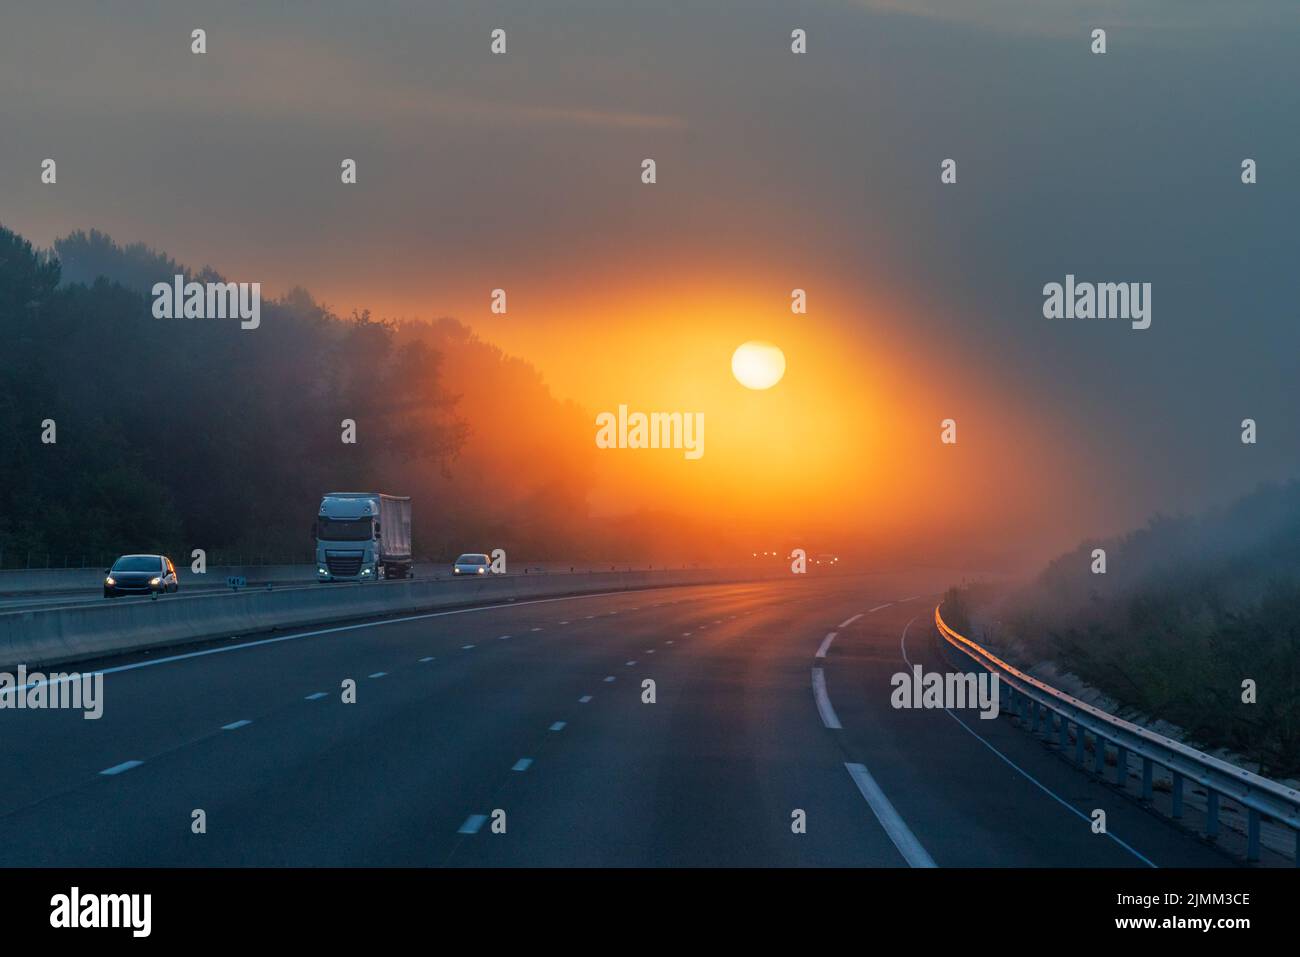 Landscape of a highway with a truck and several vehicles circulating at dawn, and the sun appearing through the clouds, allowing its circumference to Stock Photo